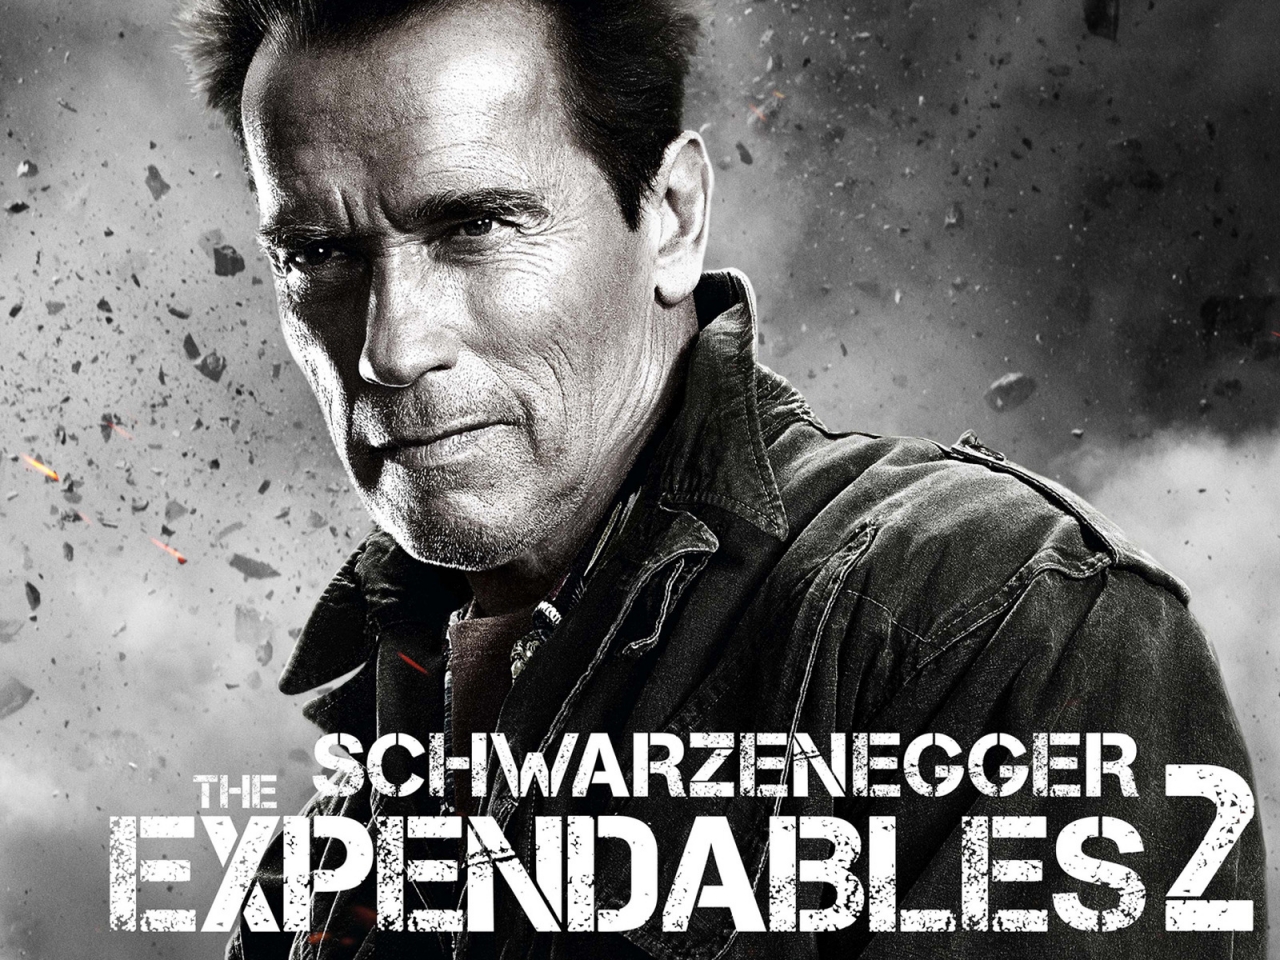 Arnold Schwarzenegger Expendables 2 for 1280 x 960 resolution